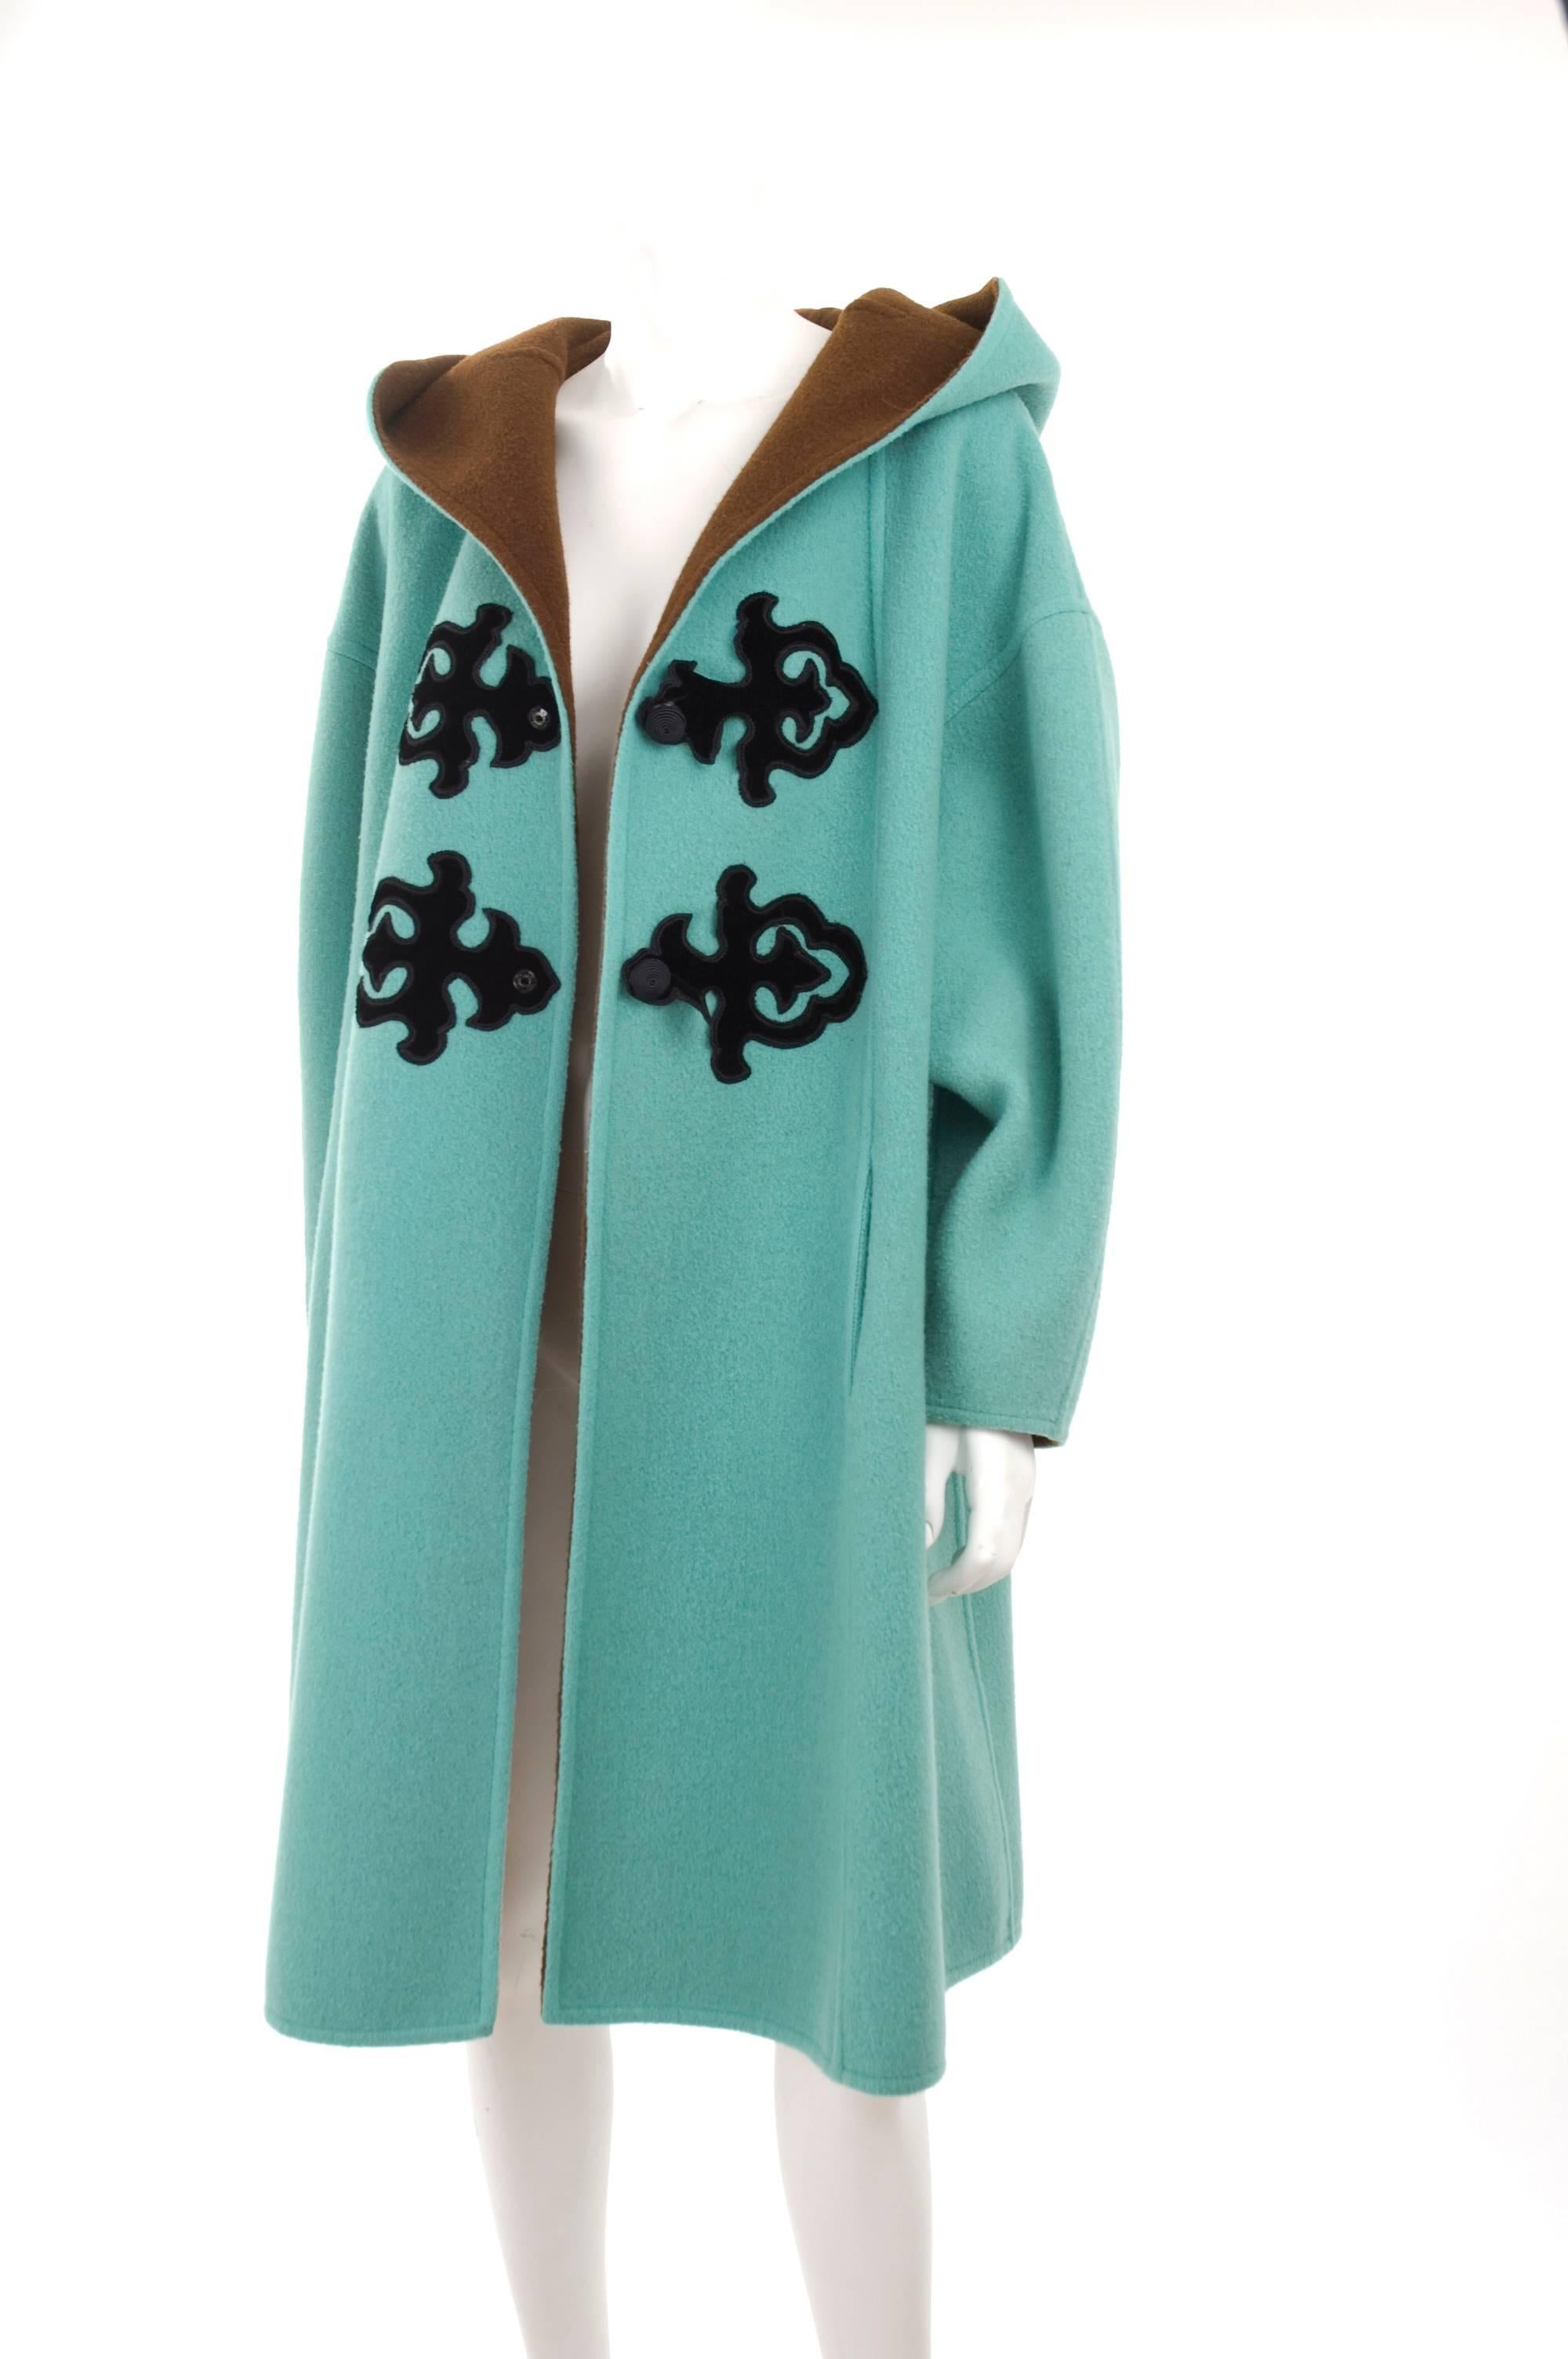 1990's Christian Lacroix Mint Green and Brown Oriental Appliqué Oversized Coat. The double face wool fabric in mint green and brown inside with black velvet oriental applications. Snap buttons closure.
Excellent condition - no flaws to